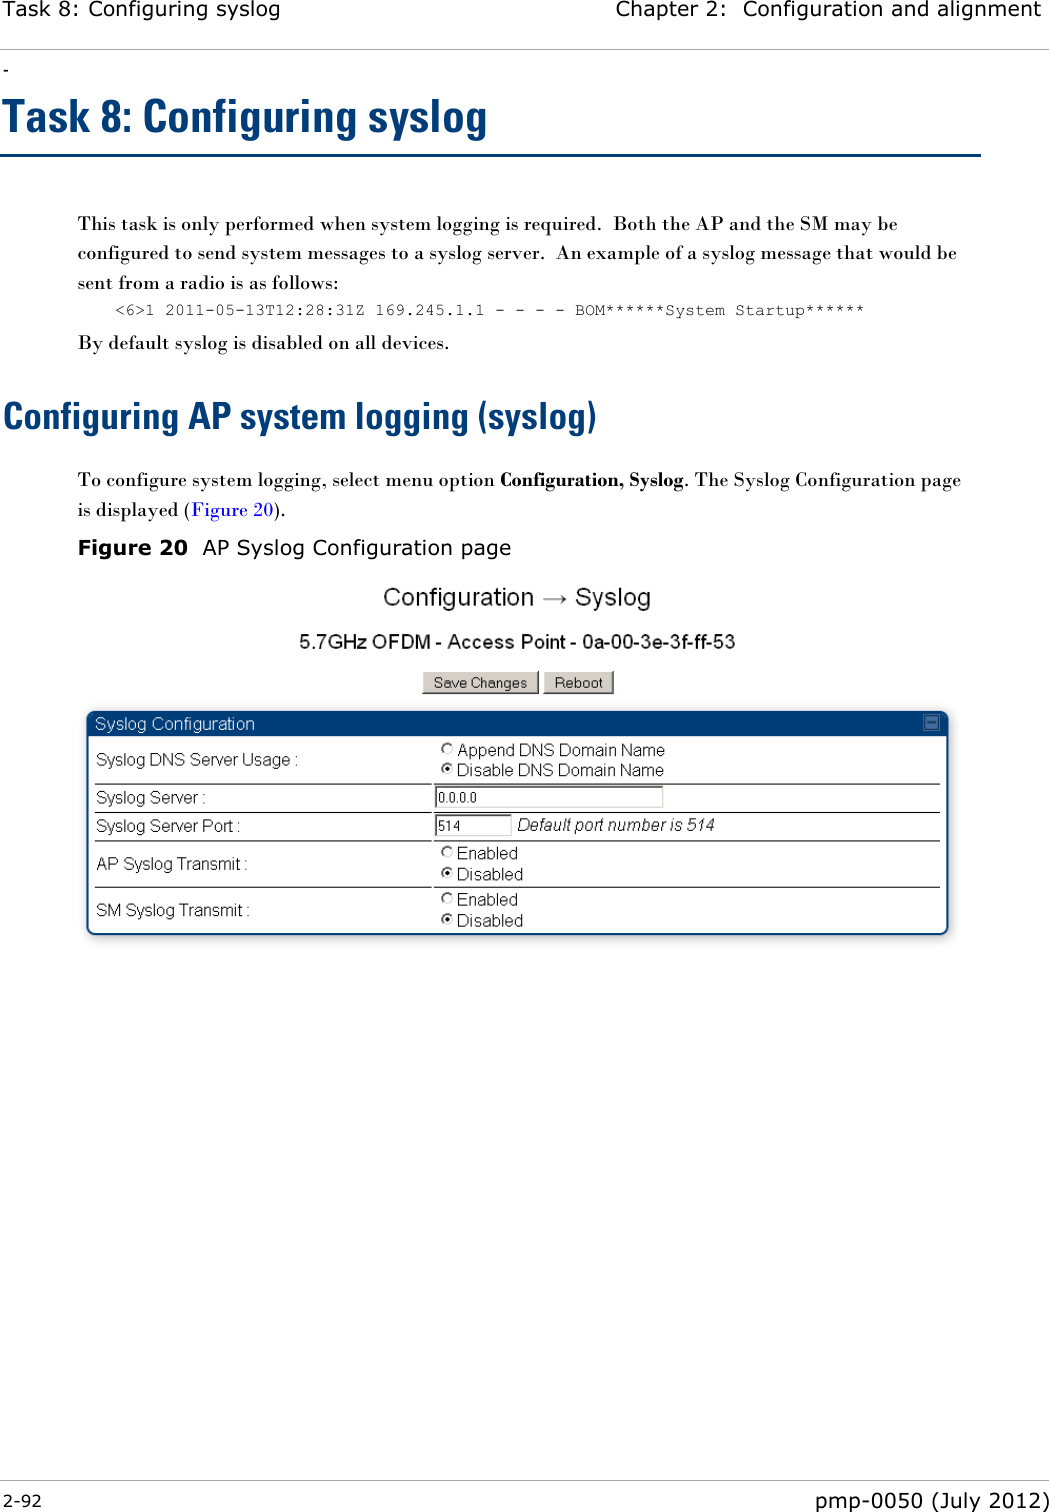 Task 8: Configuring syslog Chapter 2:  Configuration and alignment - 2-92  pmp-0050 (July 2012)  Task 8: Configuring syslog This task is only performed when system logging is required.  Both the AP and the SM may be configured to send system messages to a syslog server.  An example of a syslog message that would be sent from a radio is as follows: &lt;6&gt;1 2011-05-13T12:28:31Z 169.245.1.1 - - - - BOM******System Startup****** By default syslog is disabled on all devices. Configuring AP system logging (syslog) To configure system logging, select menu option Configuration, Syslog. The Syslog Configuration page is displayed (Figure 20).  Figure 20  AP Syslog Configuration page  